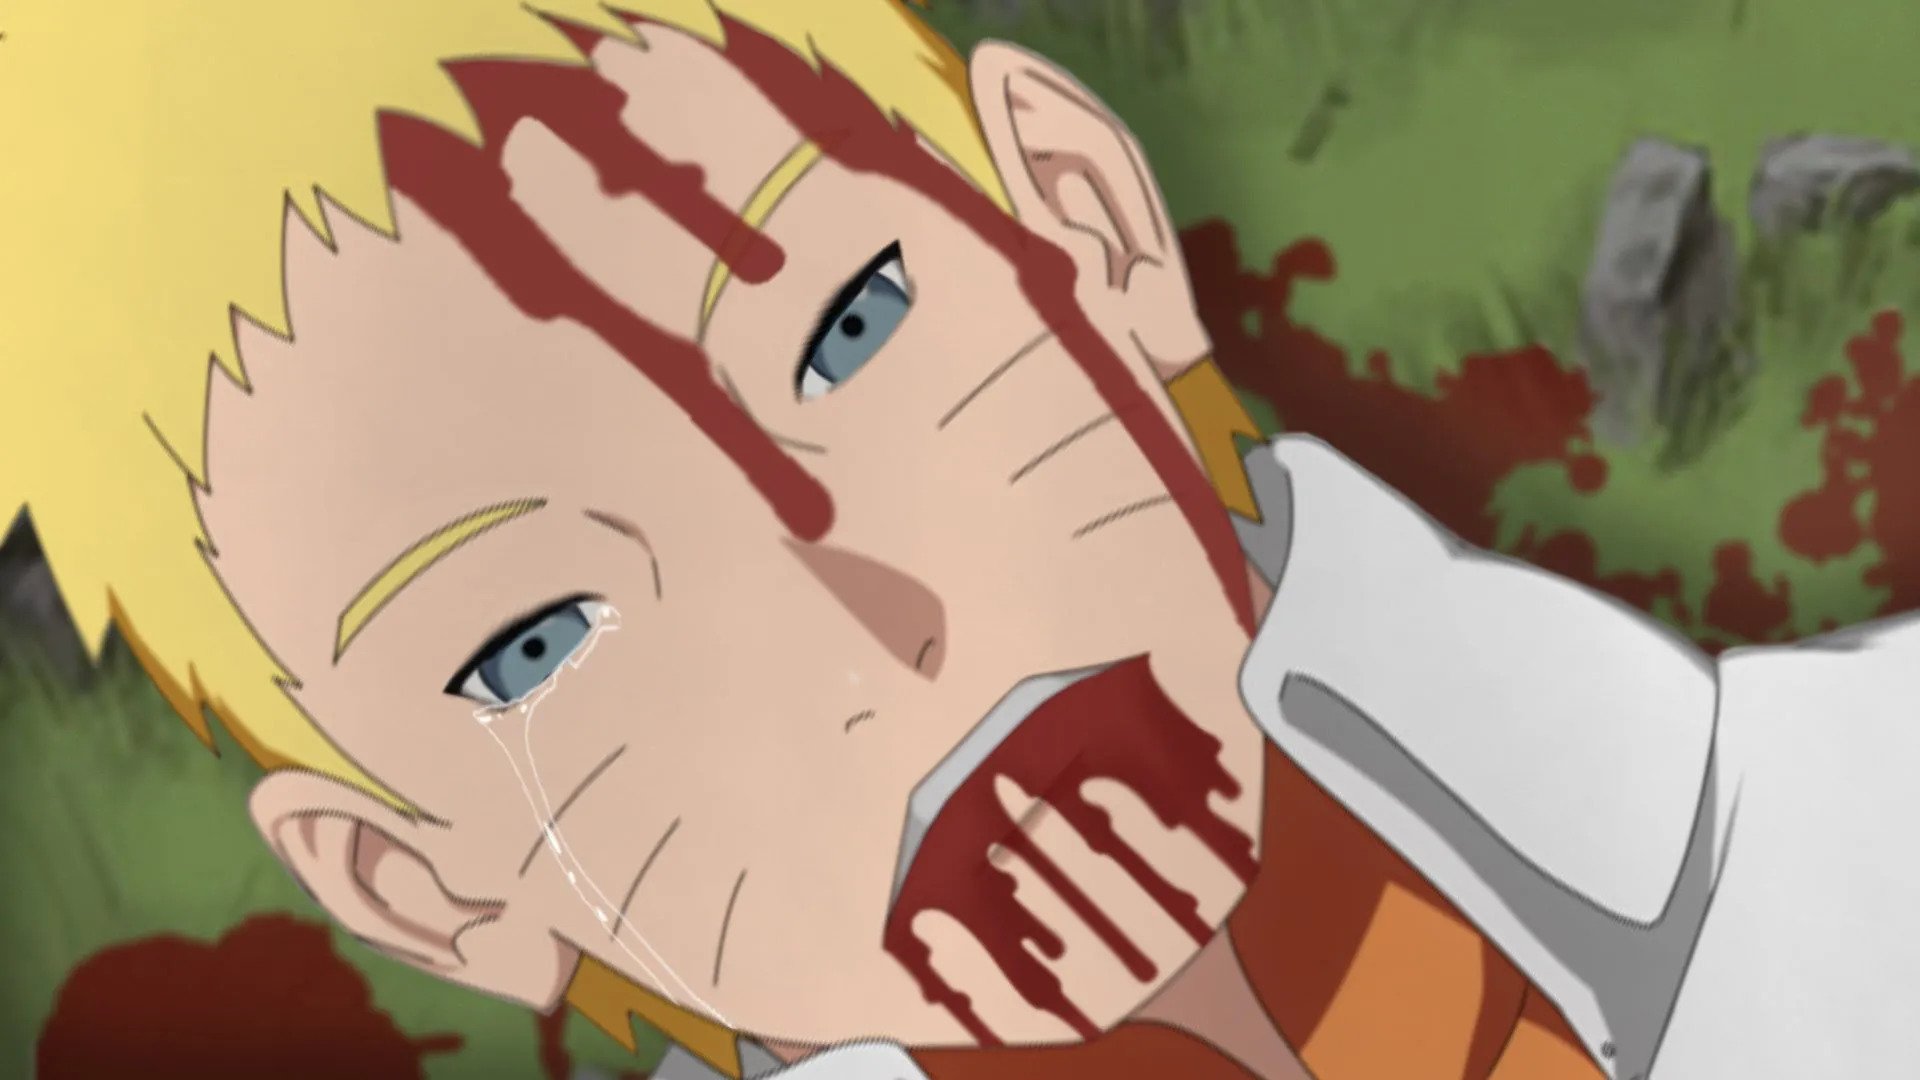 Does Naruto Die in Boruto? (Speculation and Theories)